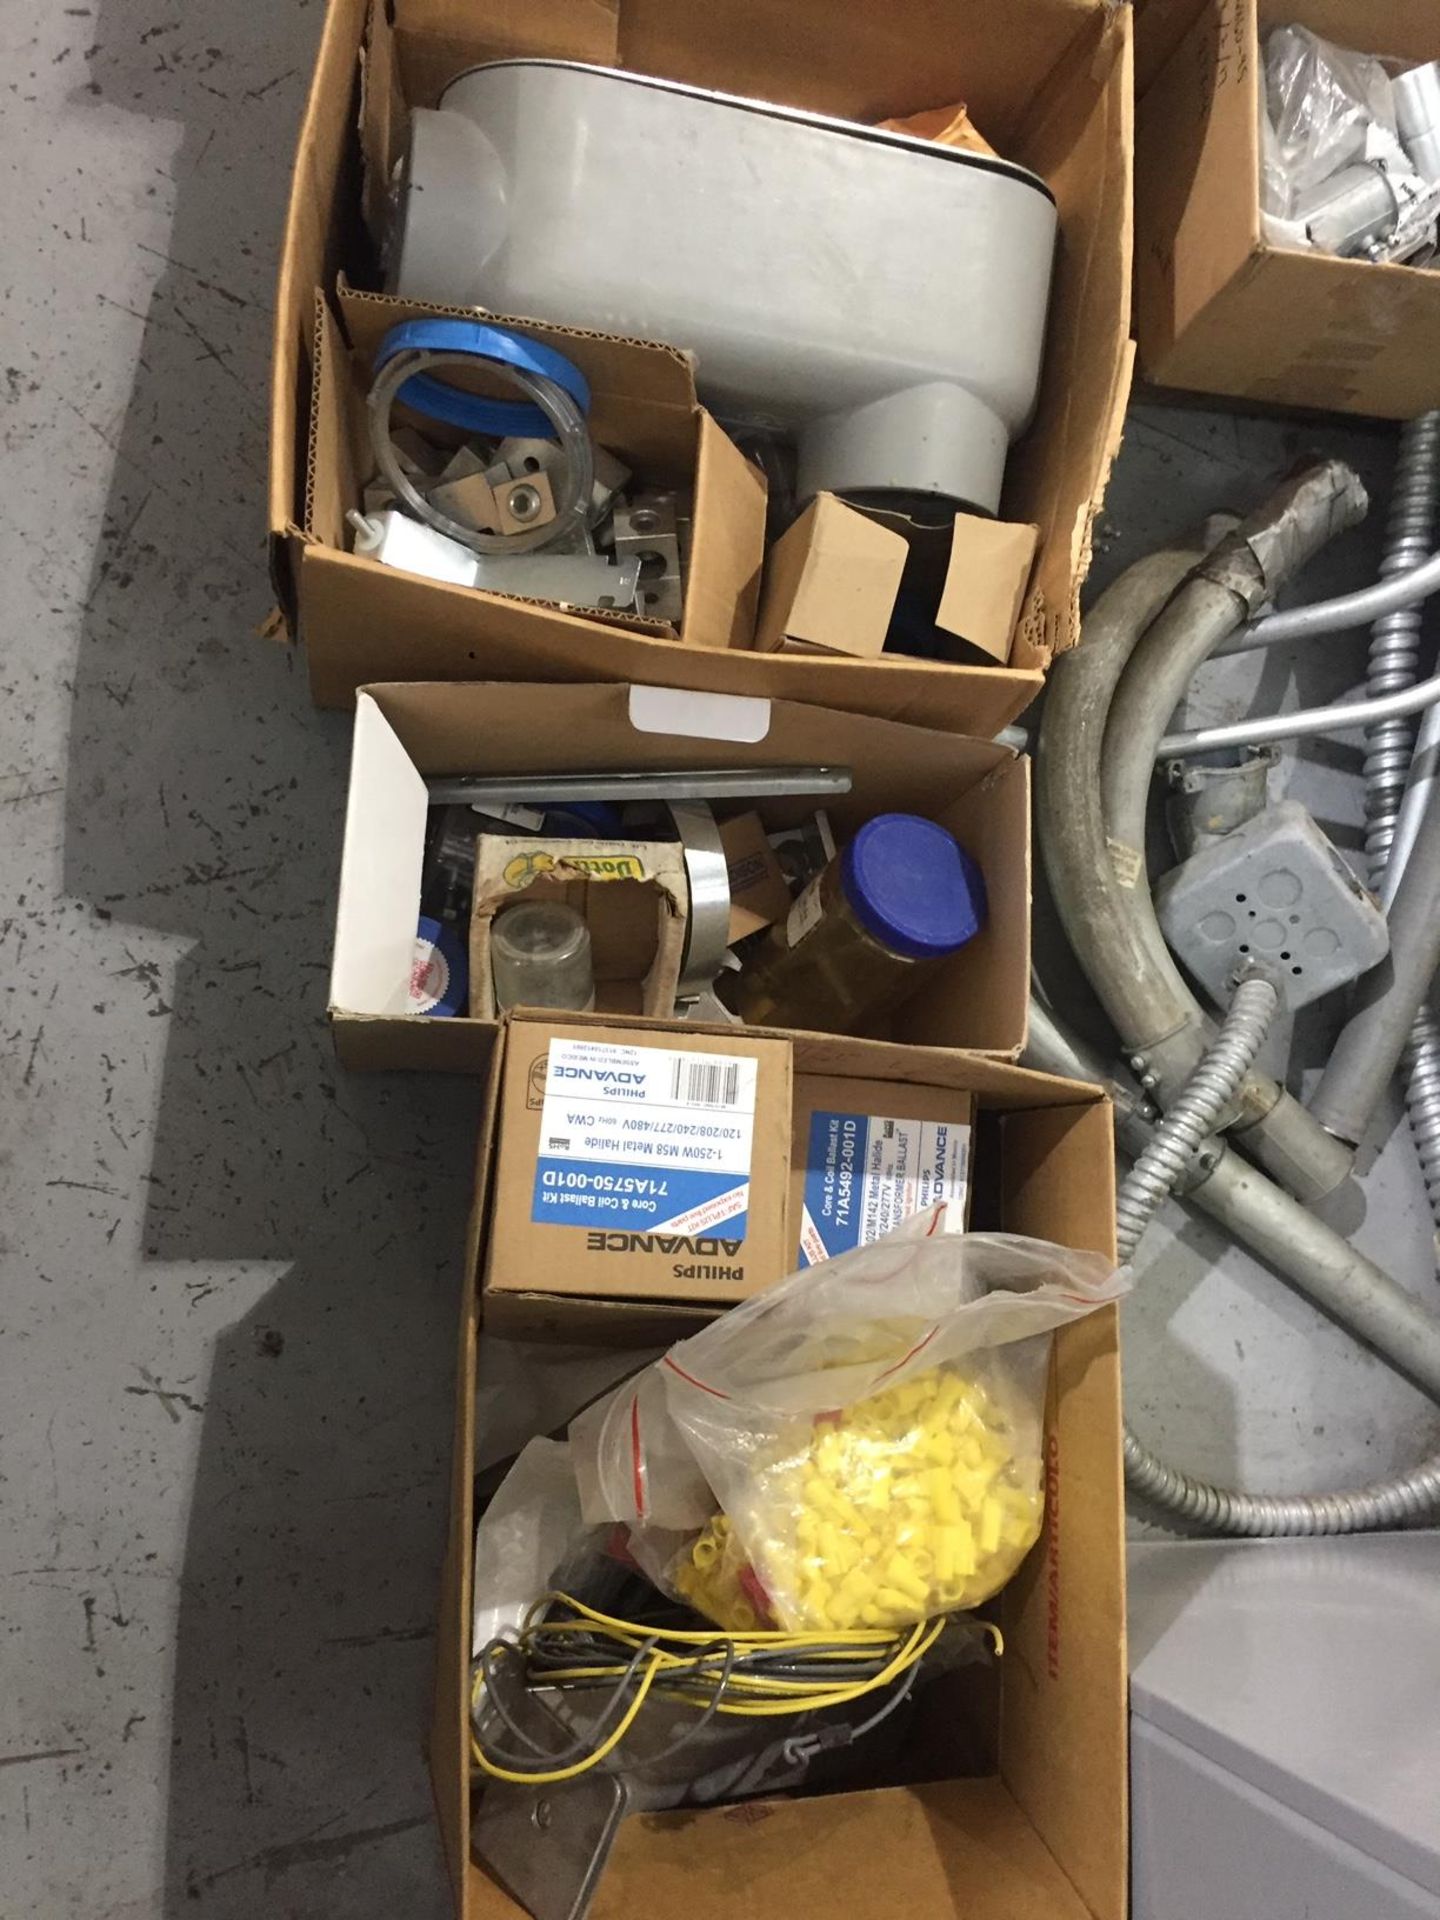 LOT CONSISTING OF ASSORTMENT OF ELECTRICAL BUILDING SUPPLIES - Image 4 of 5